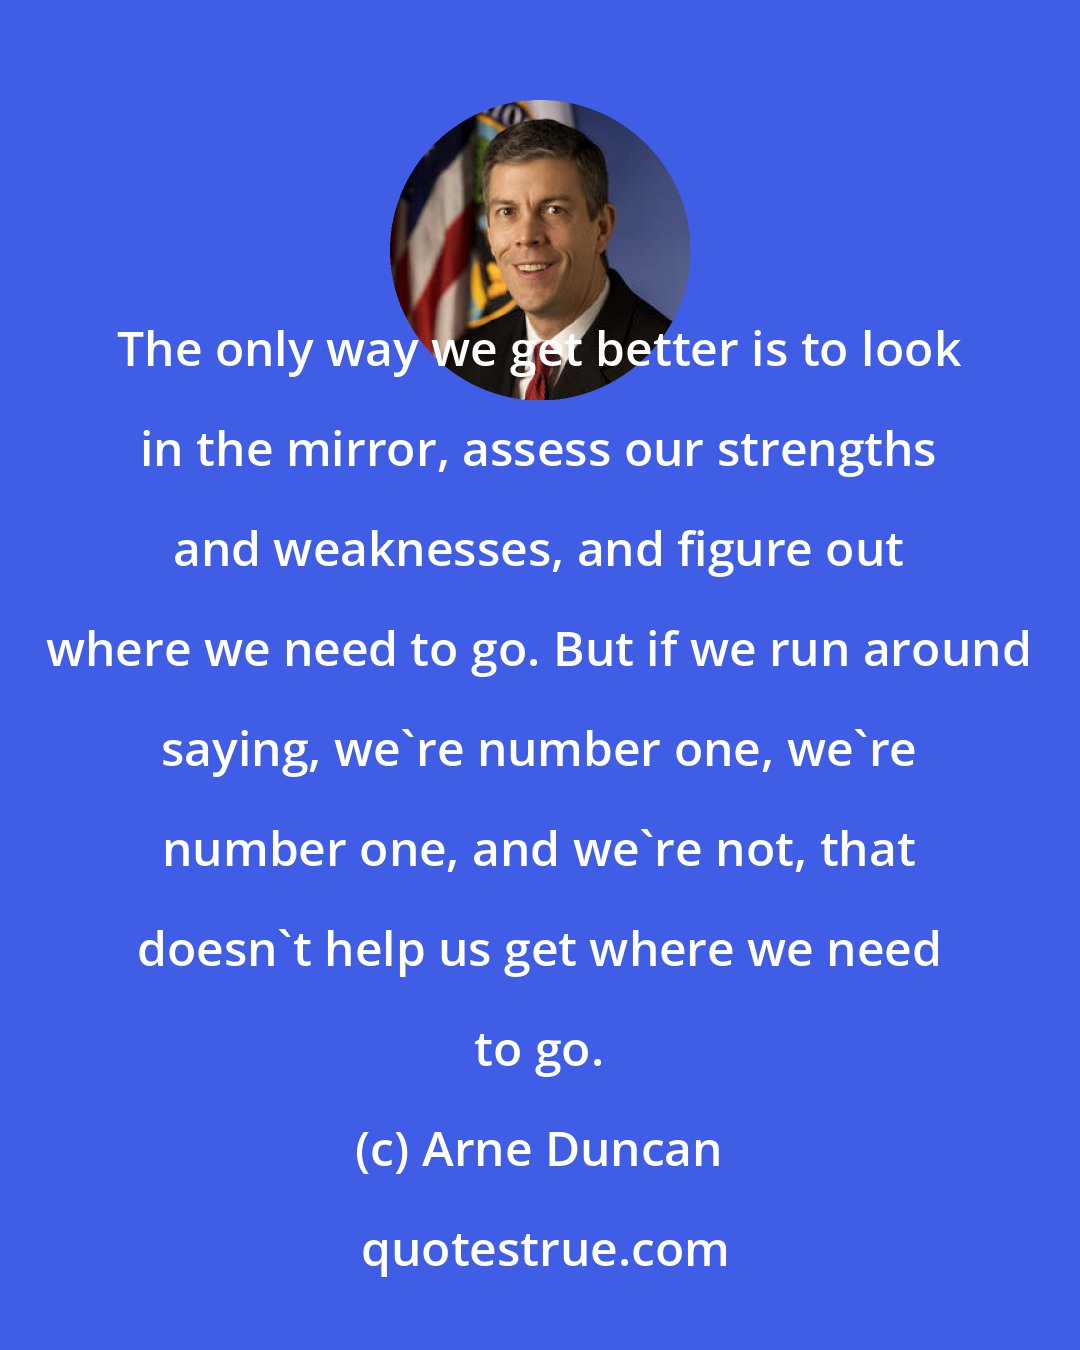 Arne Duncan: The only way we get better is to look in the mirror, assess our strengths and weaknesses, and figure out where we need to go. But if we run around saying, we're number one, we're number one, and we're not, that doesn't help us get where we need to go.